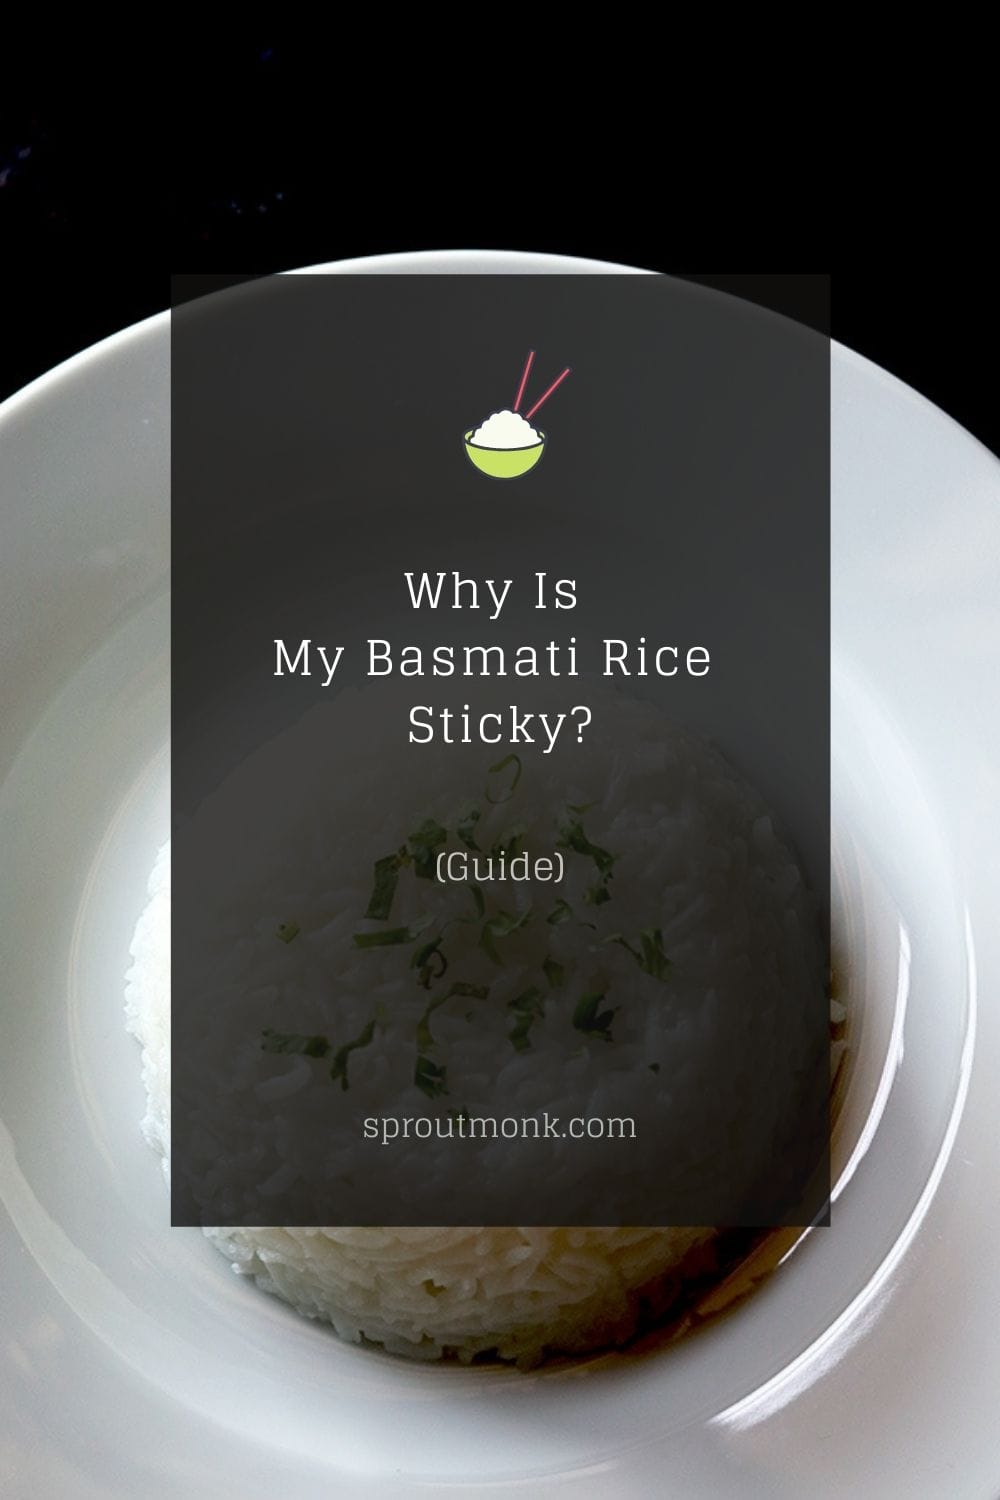 cover image for why is my basmati rice sticky guide